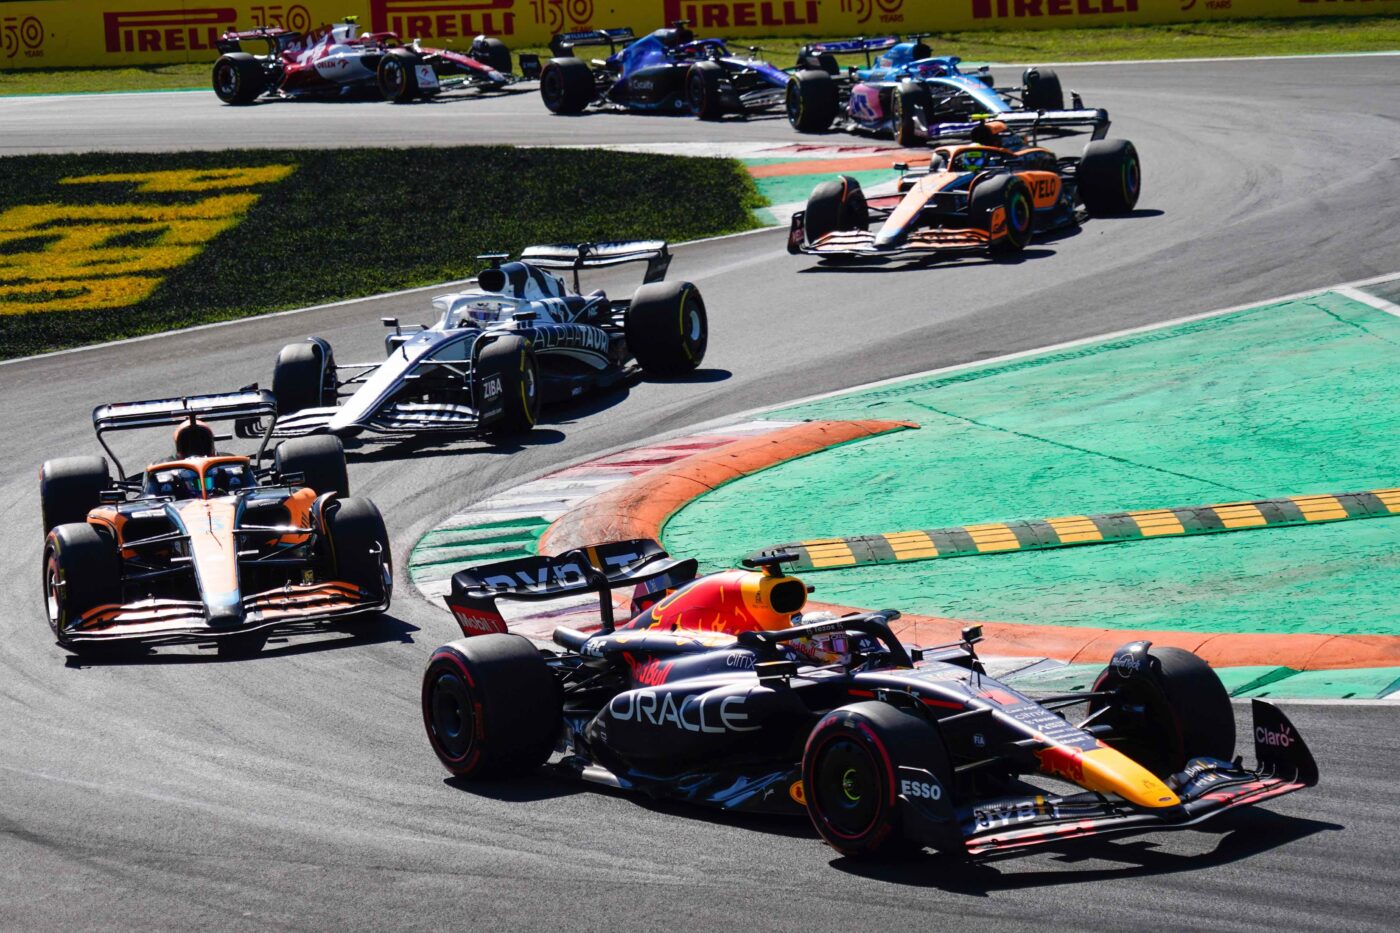 The Most Valuable Formula 1 Team Has Finally Been Revealed